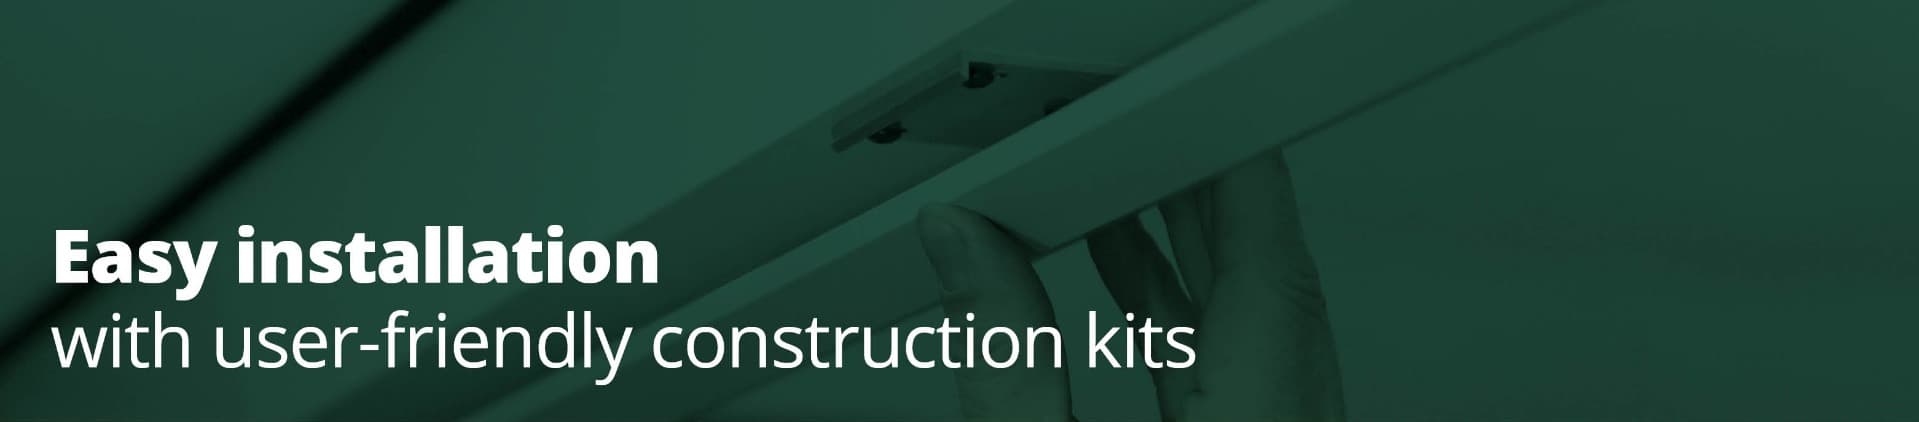 Easy installation with user free construction kits